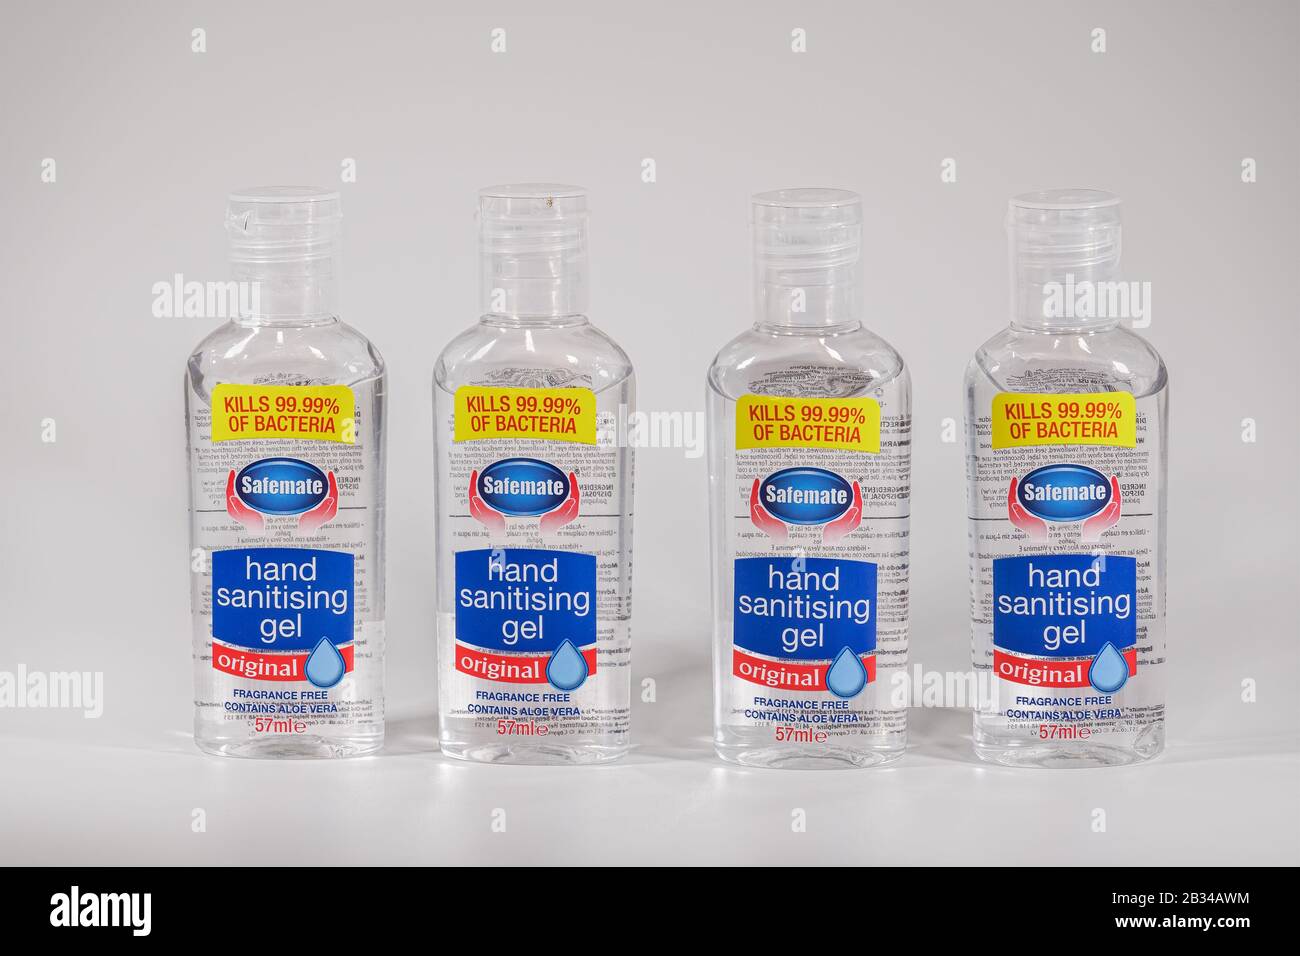 Alcohol-based hand sanitizer antiseptic gels against white background. Bottles of Safemate liquid, used as a hand disinfectant to kill bacteria. Stock Photo